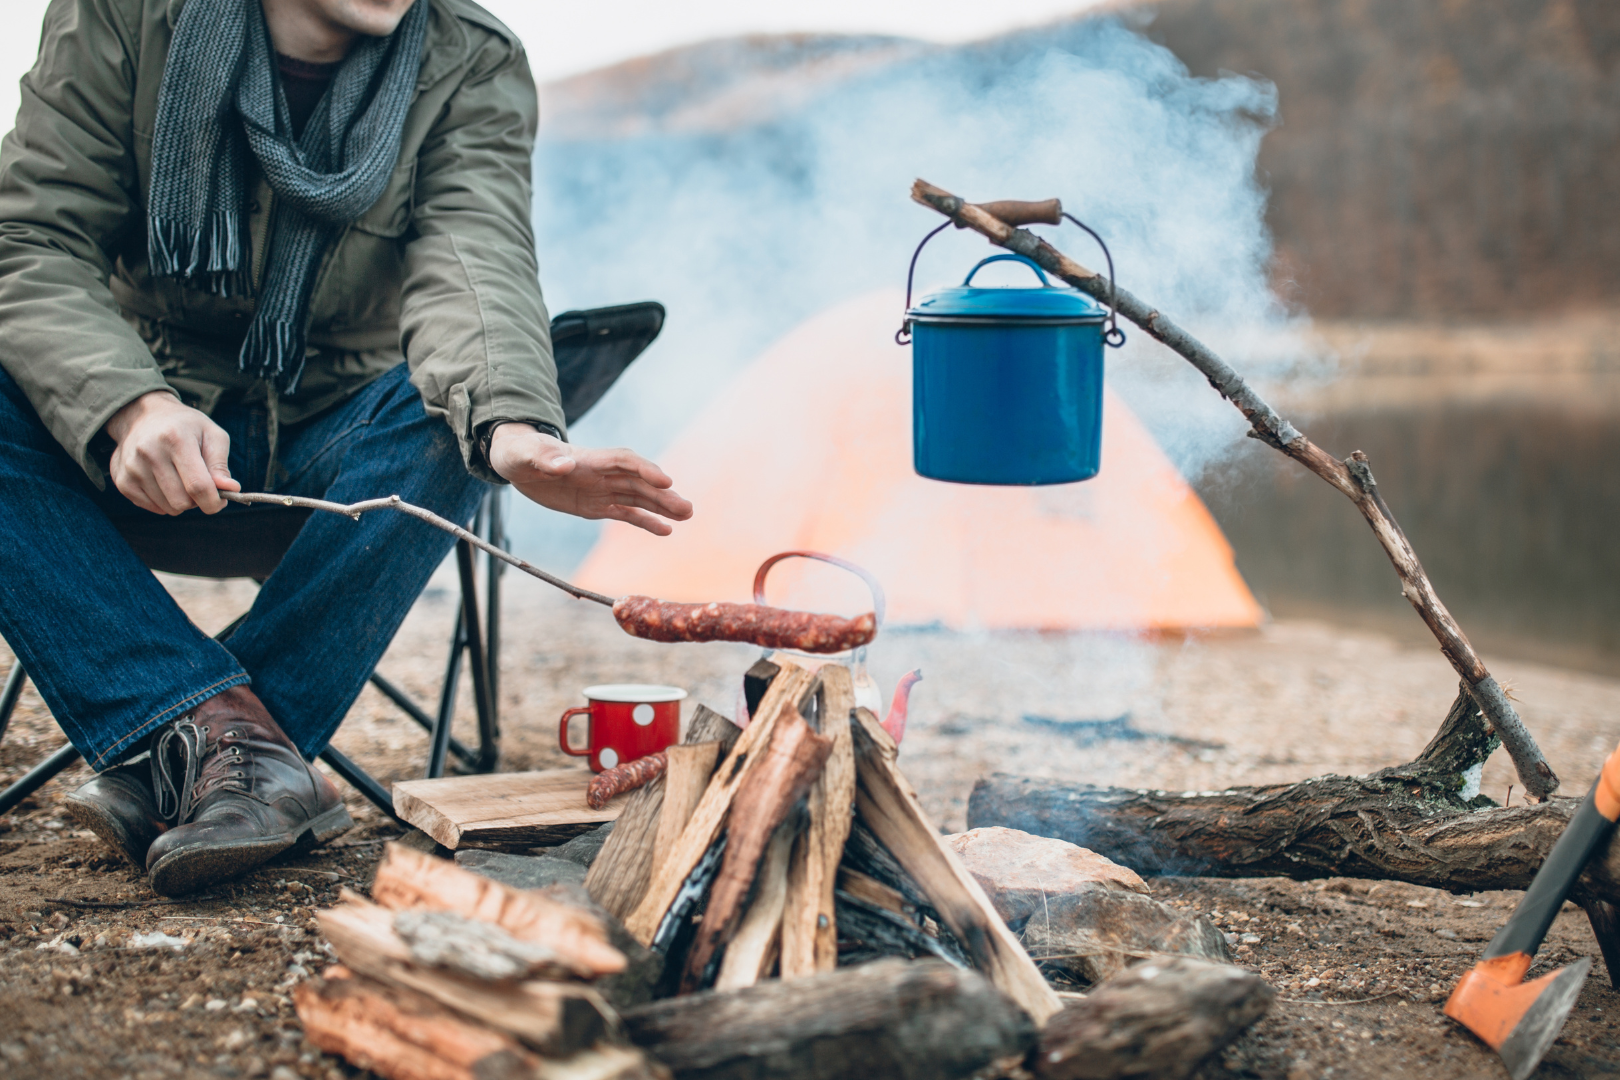 bushcraft cooking gear over a wood fire